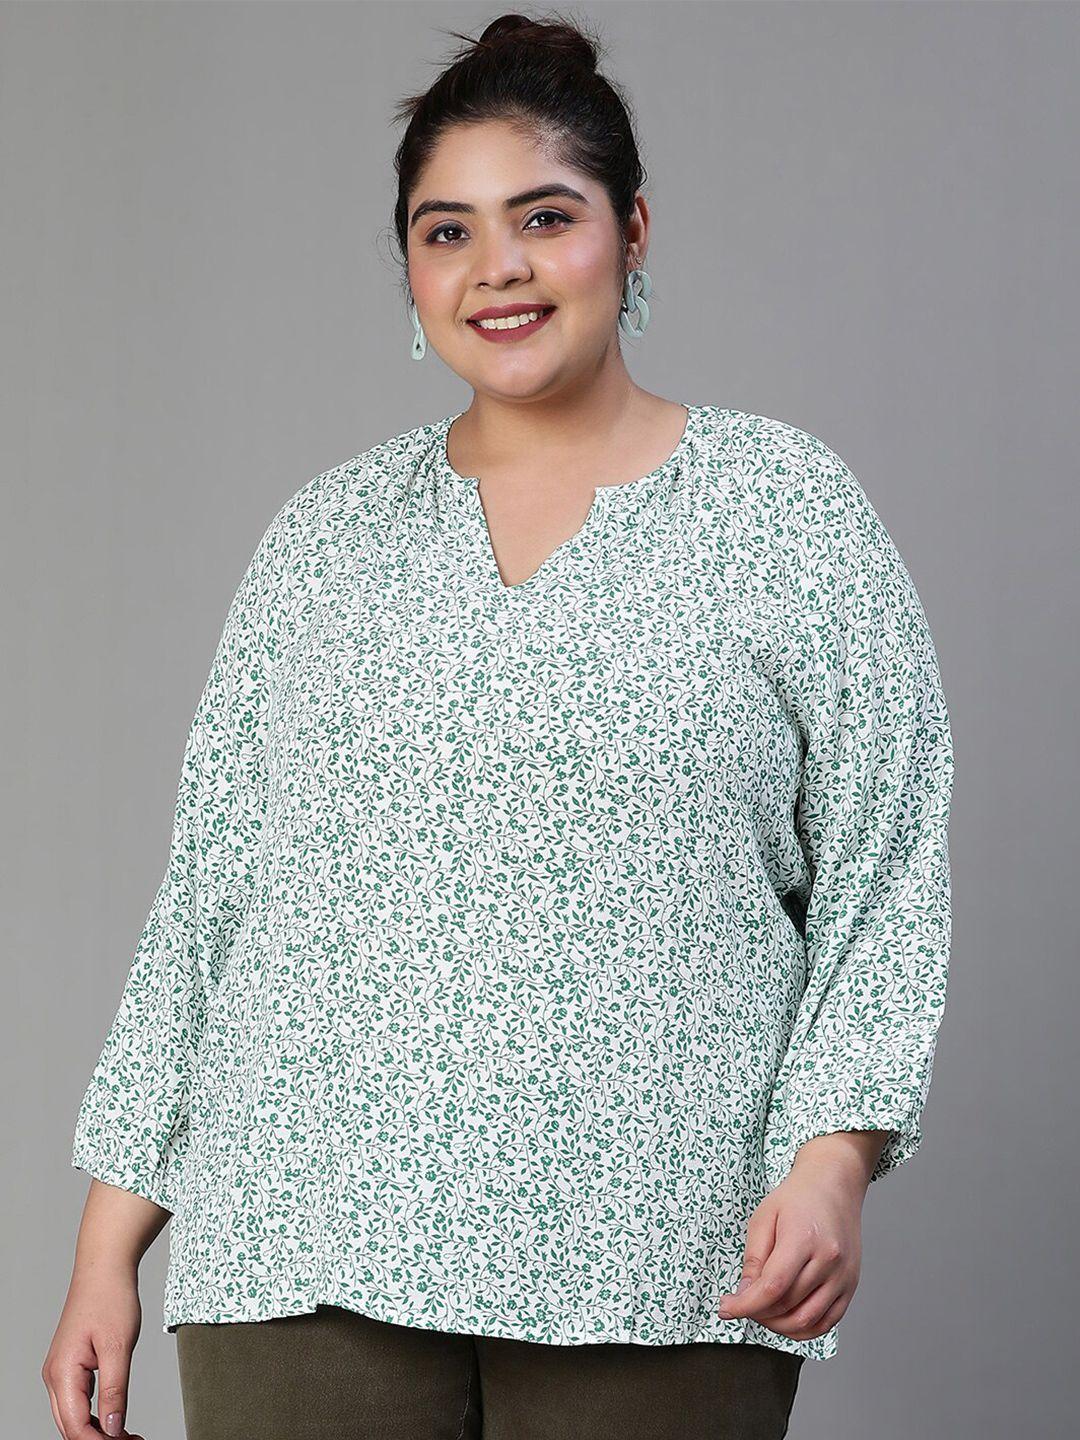 oxolloxo plus size green floral print crepe top